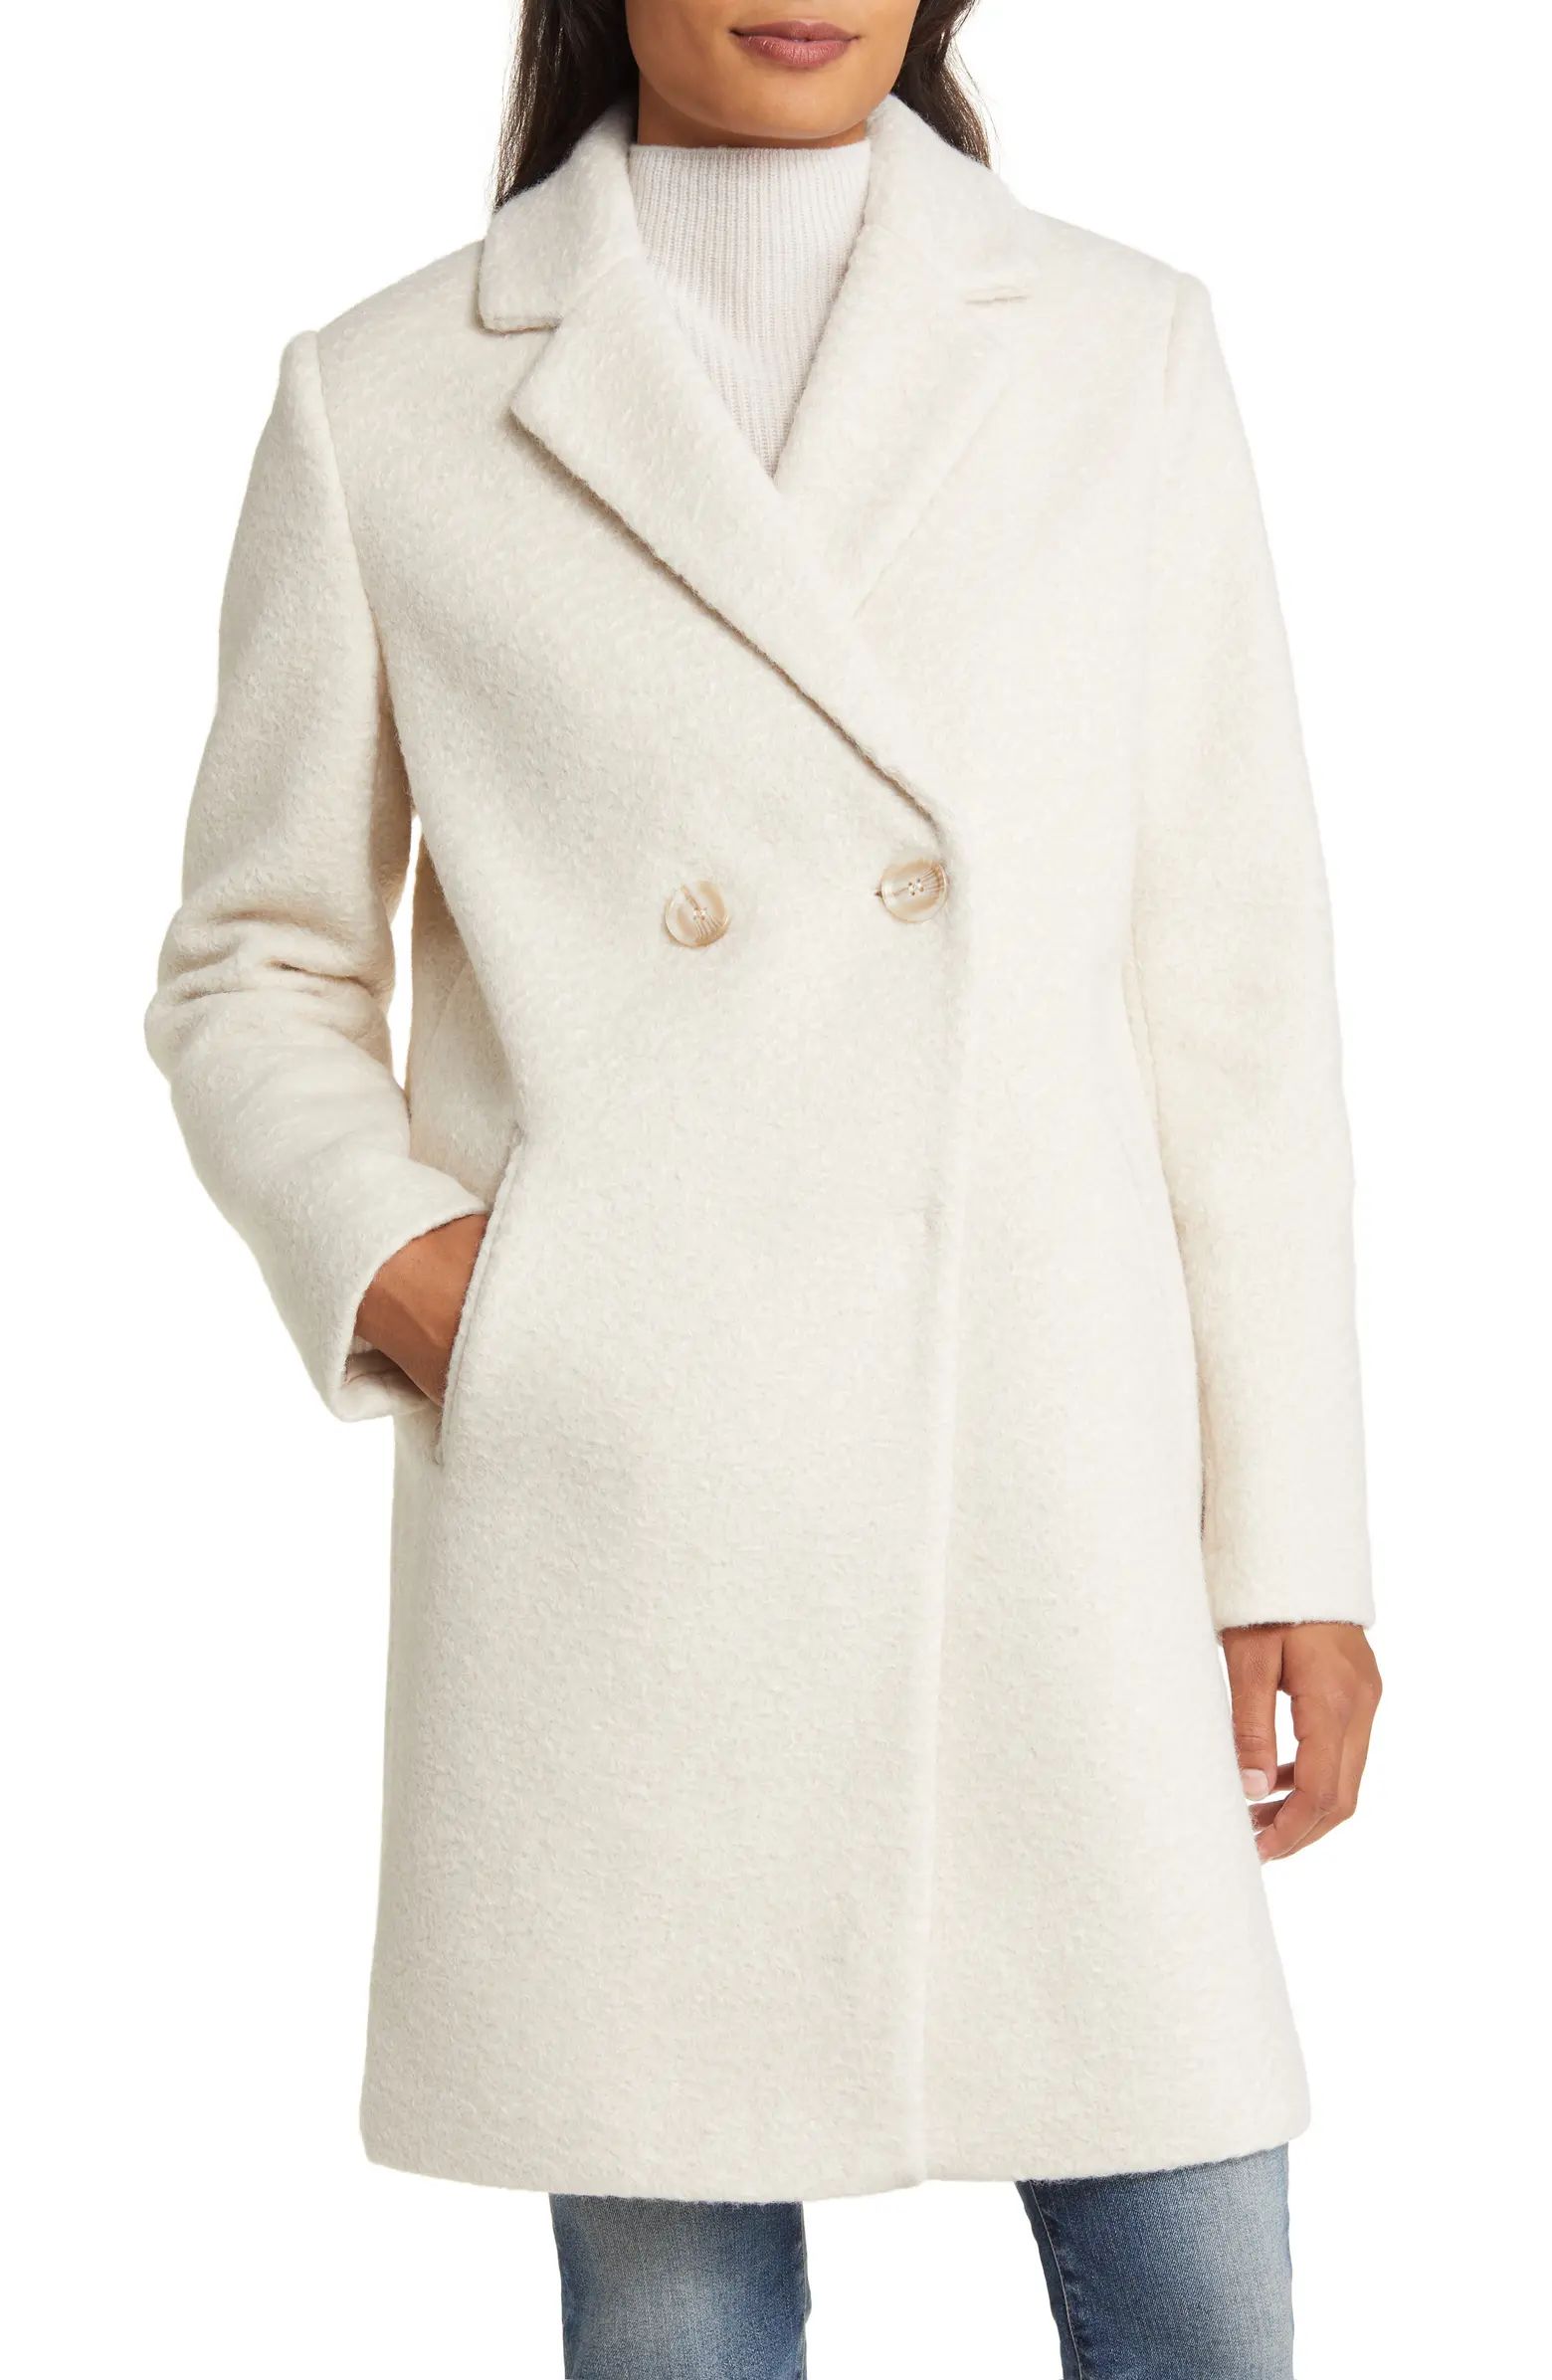 Stay warm in this textured bouclé coat fashioned in a double-breasted silhouette with notched la... | Nordstrom